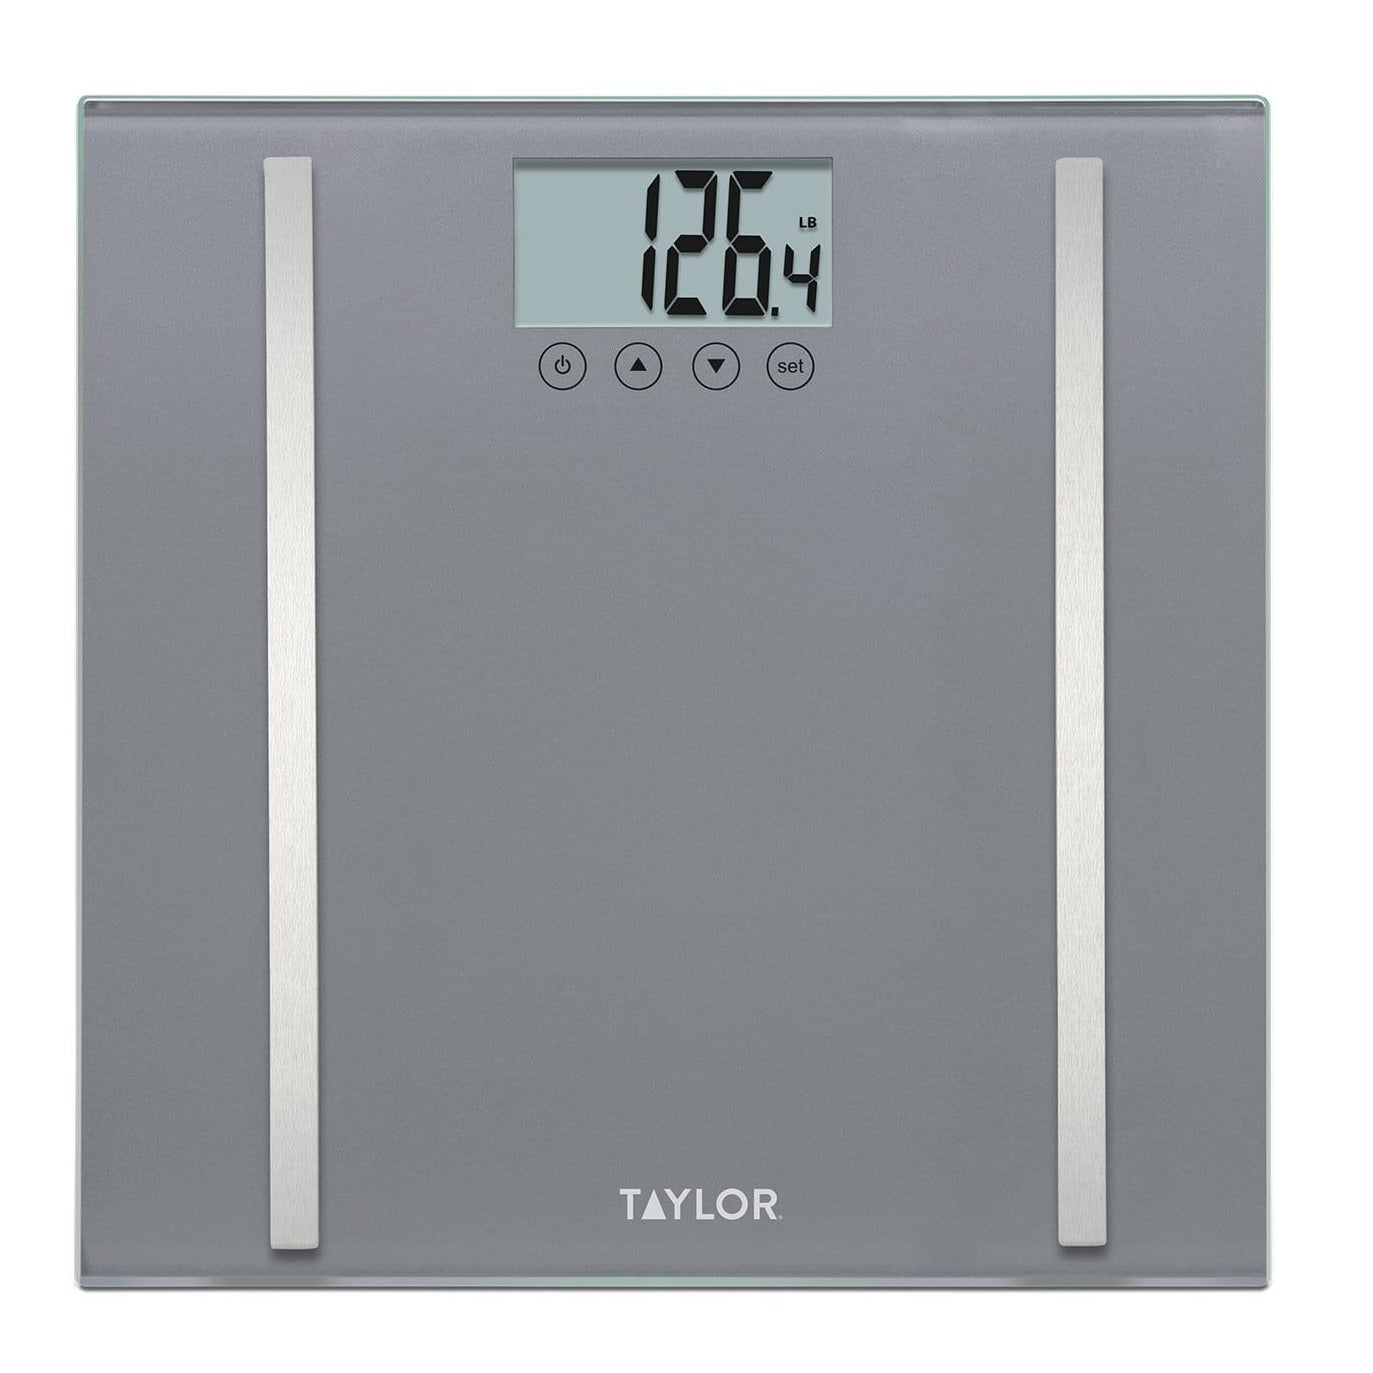 Taylor Body Analyzer Scale, Stainless Steel, Bathroom Scales